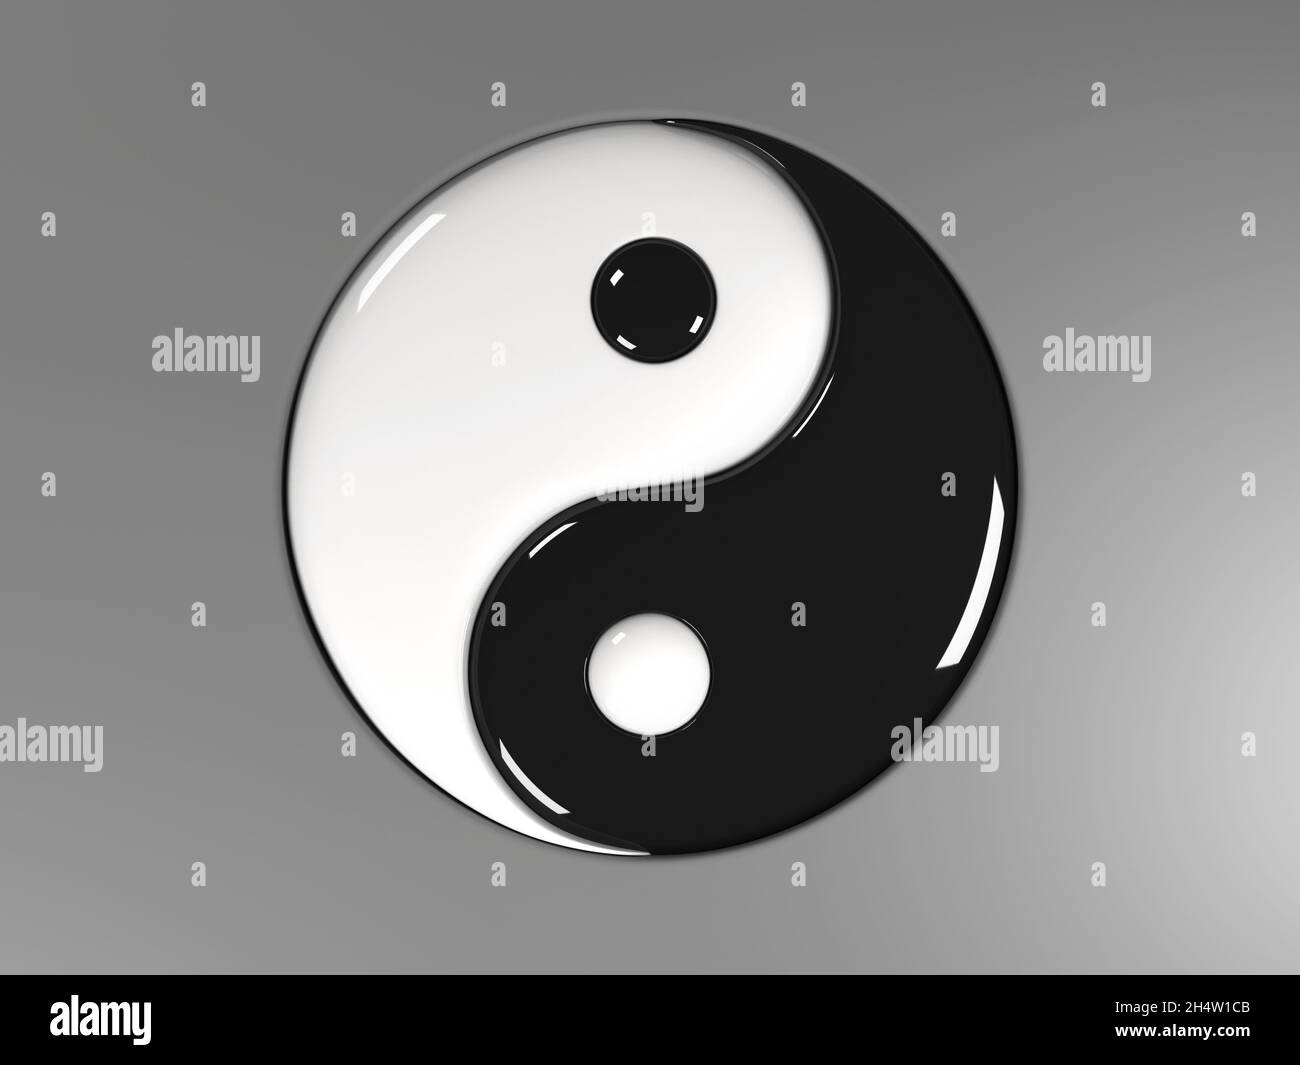 3d rendering of the ancient symbol of Tao (yin and yang) with a liquid glossy look Stock Photo